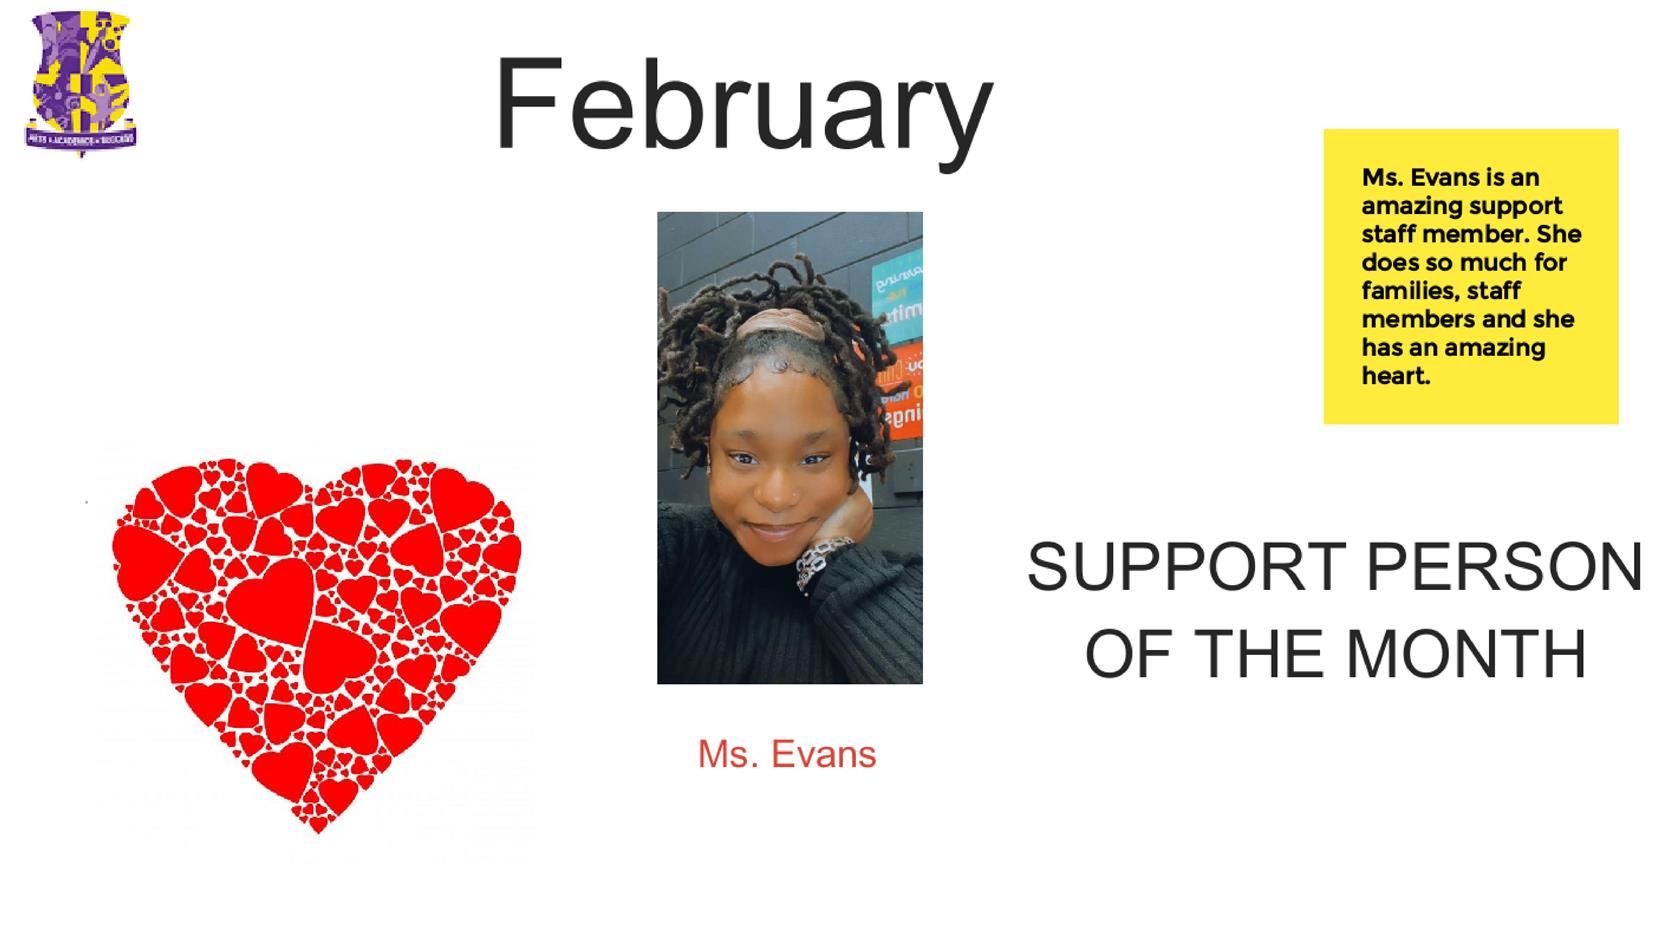  Congrats to Ms. Evans UPCA's Support Staff of the Month